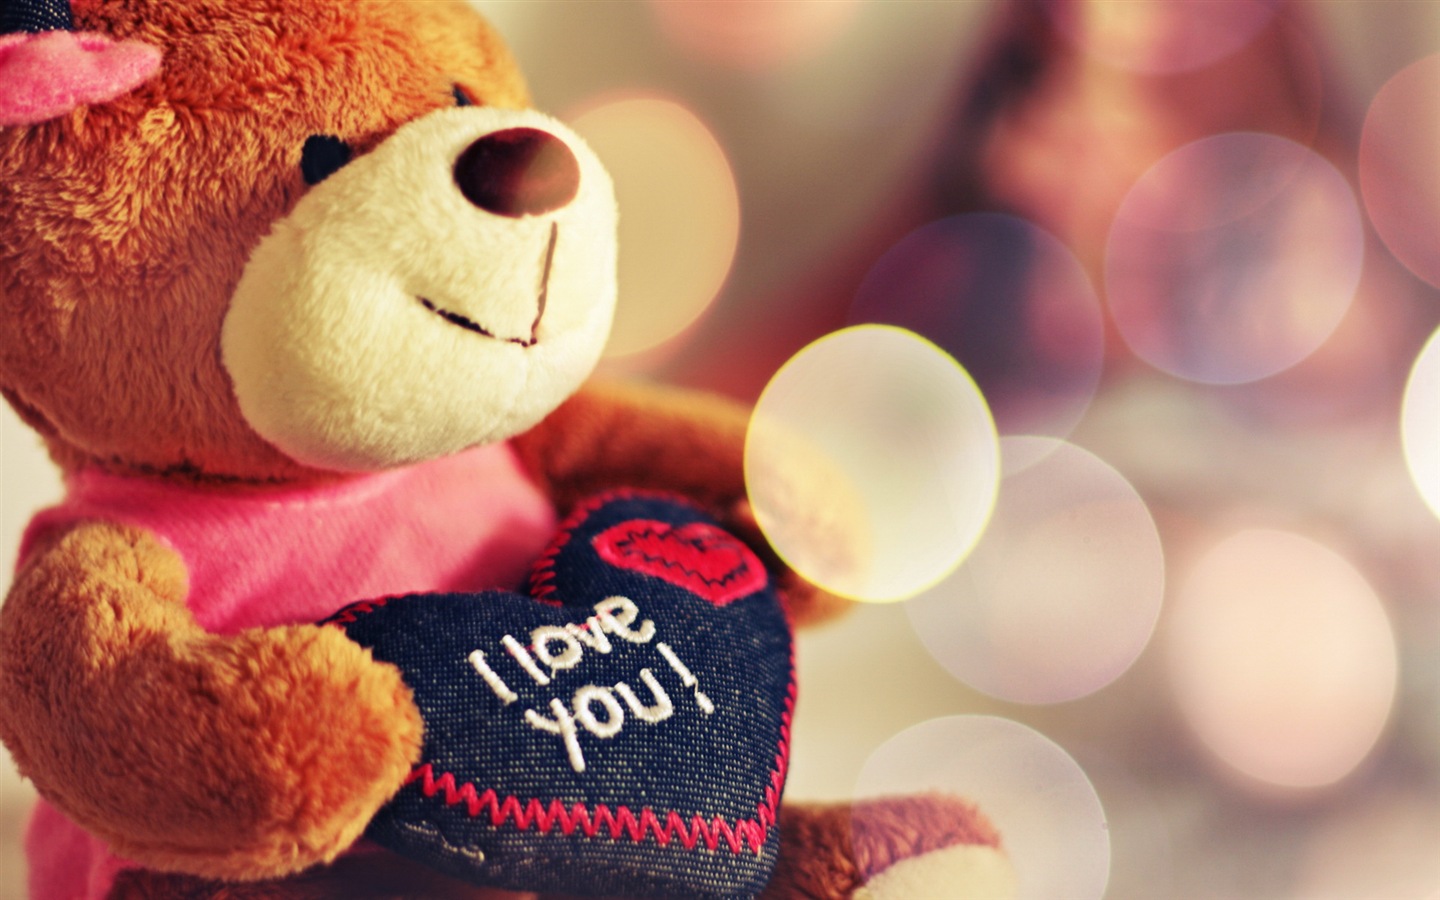 Warm and romantic Valentine's Day HD wallpapers #14 - 1440x900